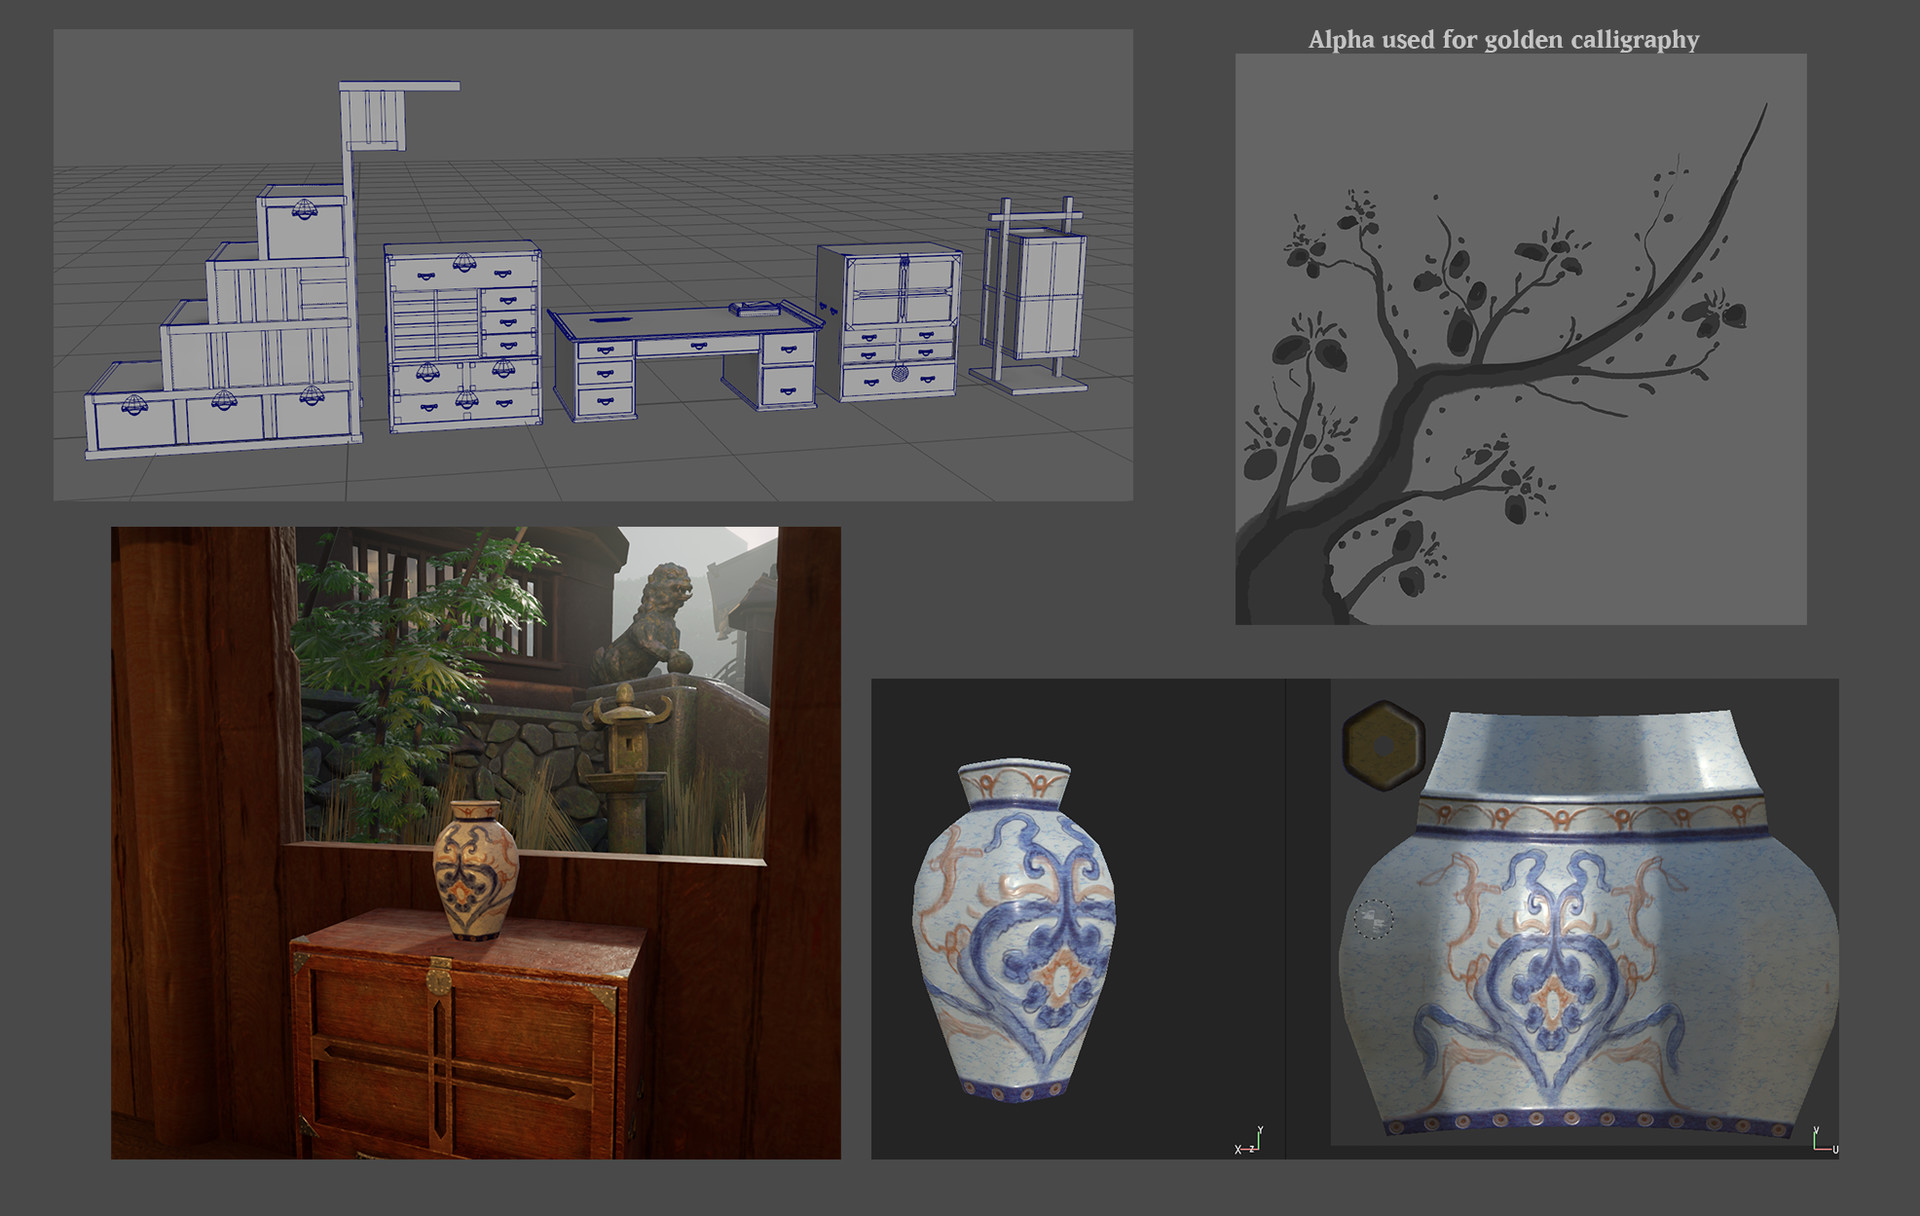 Four more screenshots. Top is Maya view of the furniture used inside the hut. Right is an “Alpha used for golden calligraphy” that looks like a tree branch, hand painted in Photoshop. Below is an Unreal 4 screenshot showing one of the furniture with a vase prop sat on top. Next is the vase, seen in Substance Painter, showing its ceramic textures.